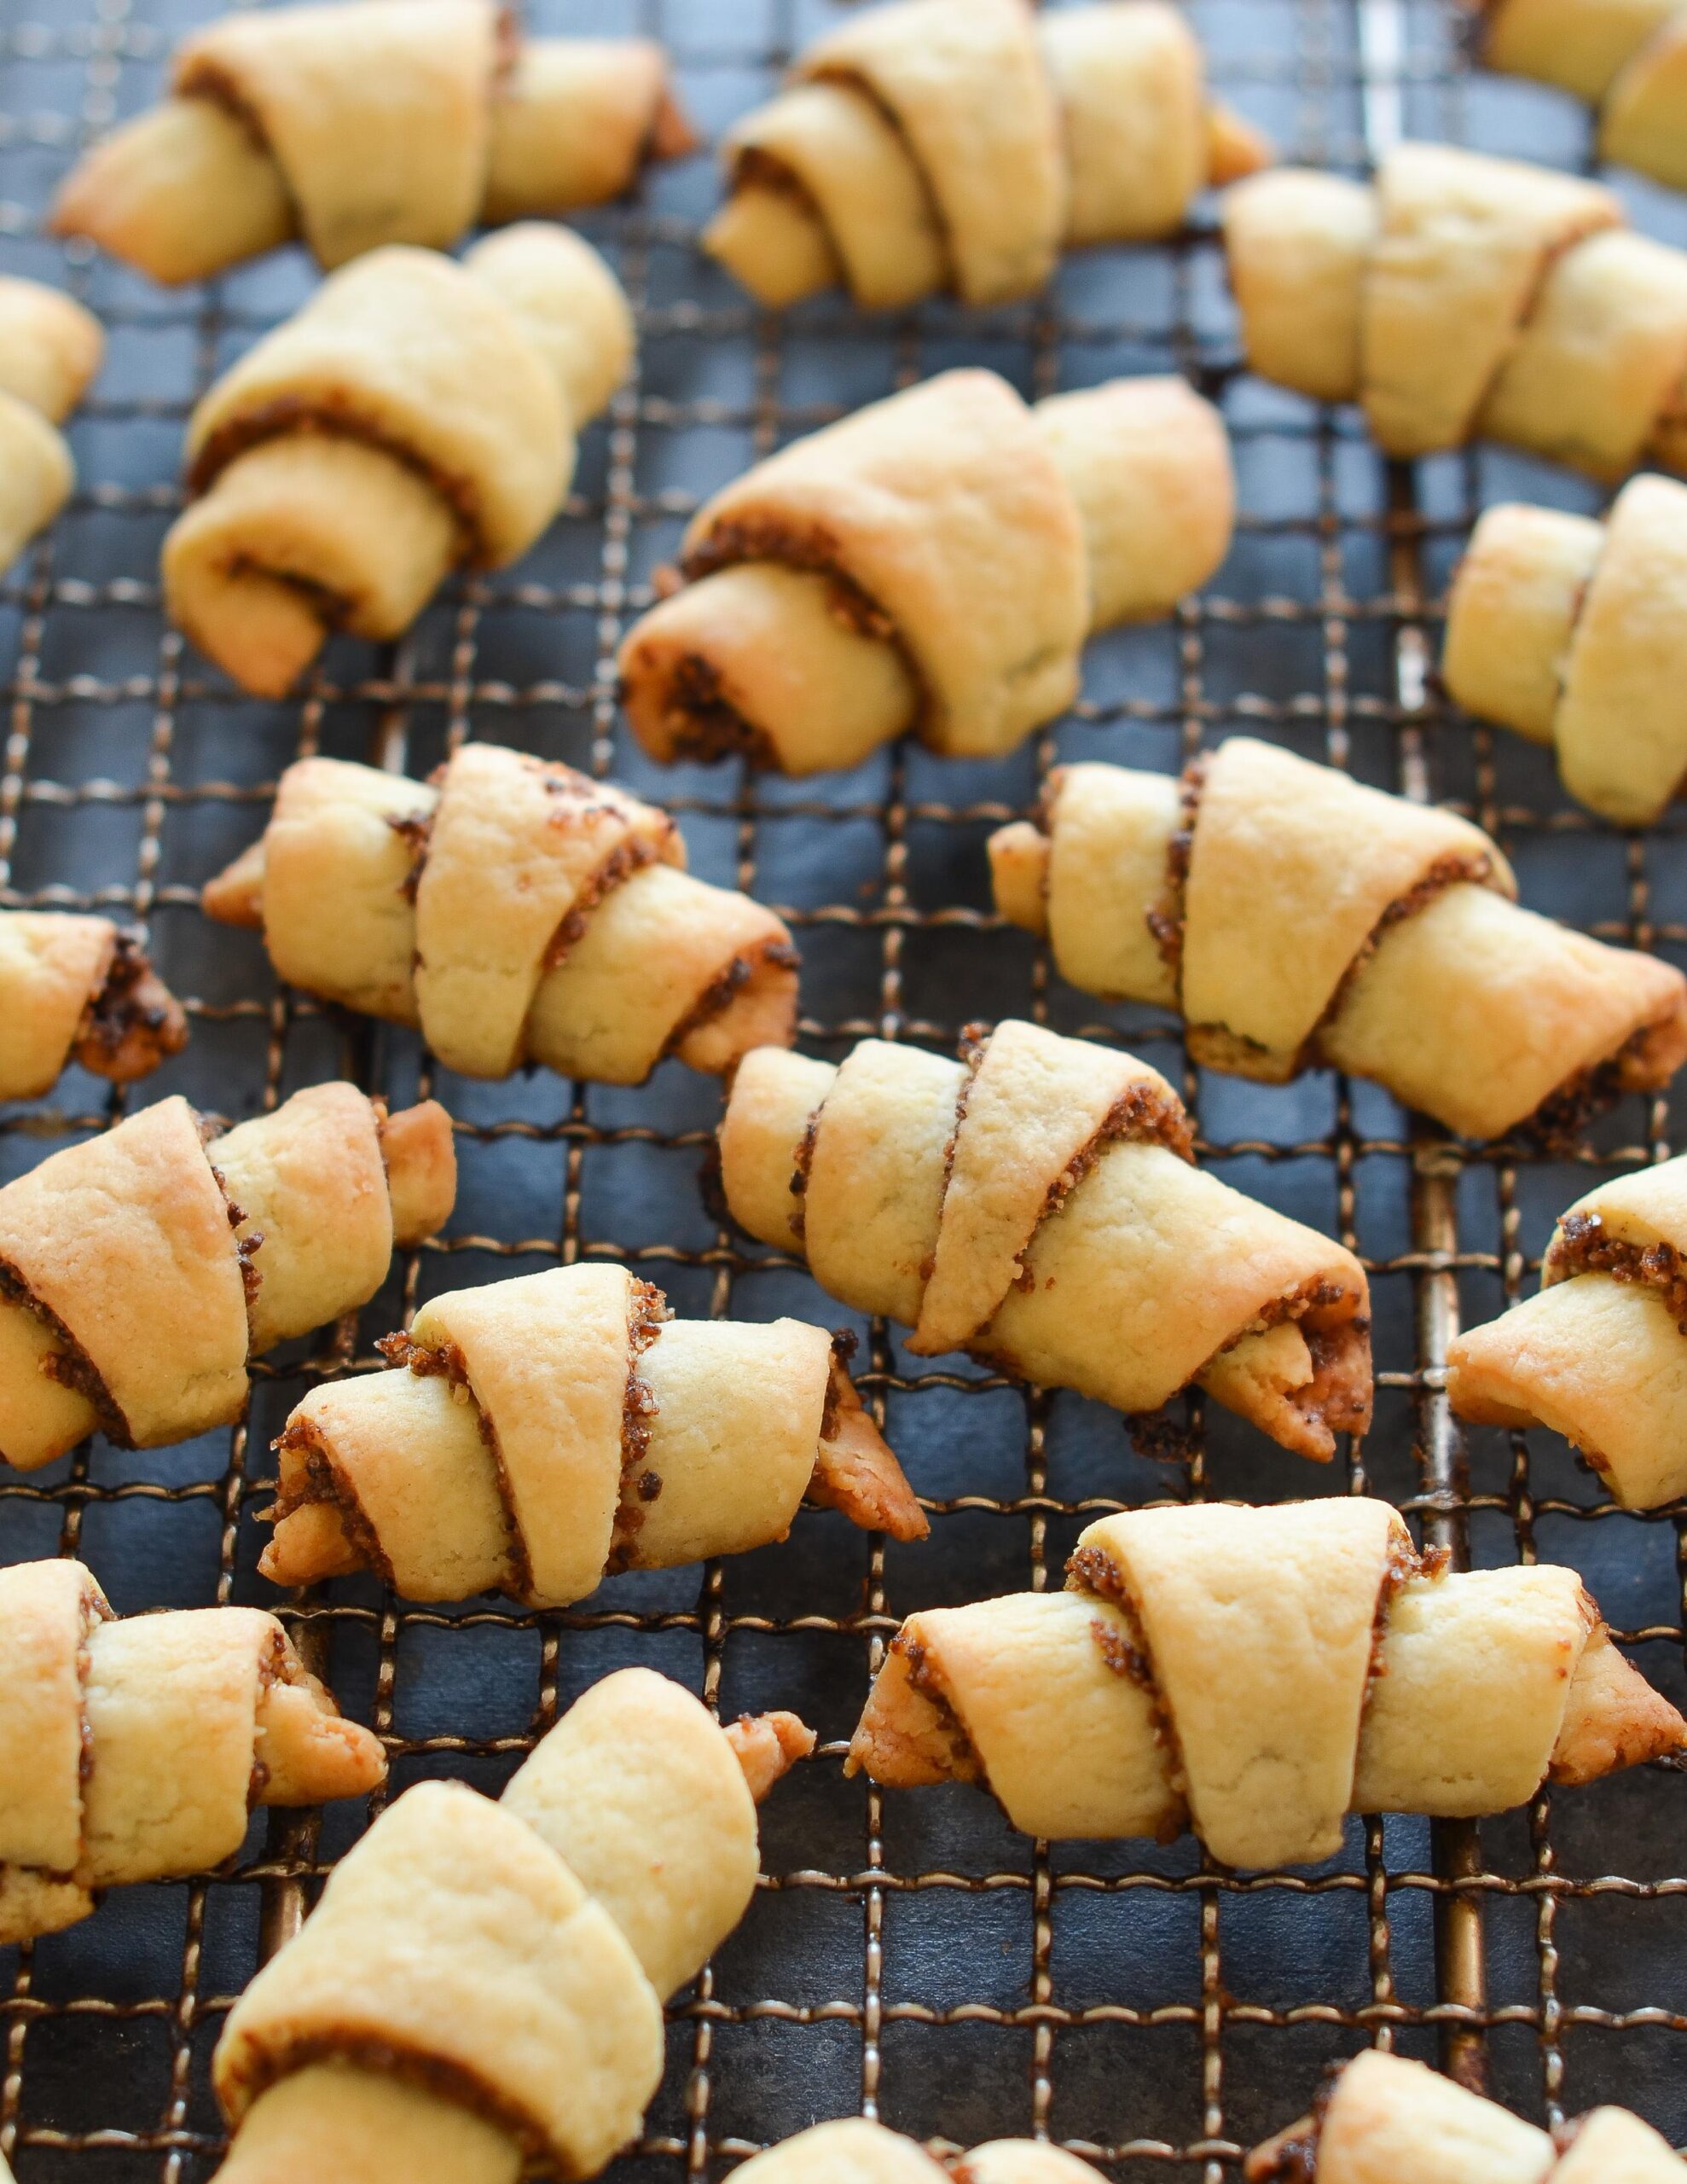  Look at the golden brown color on these rugelach; they are baked to perfection!